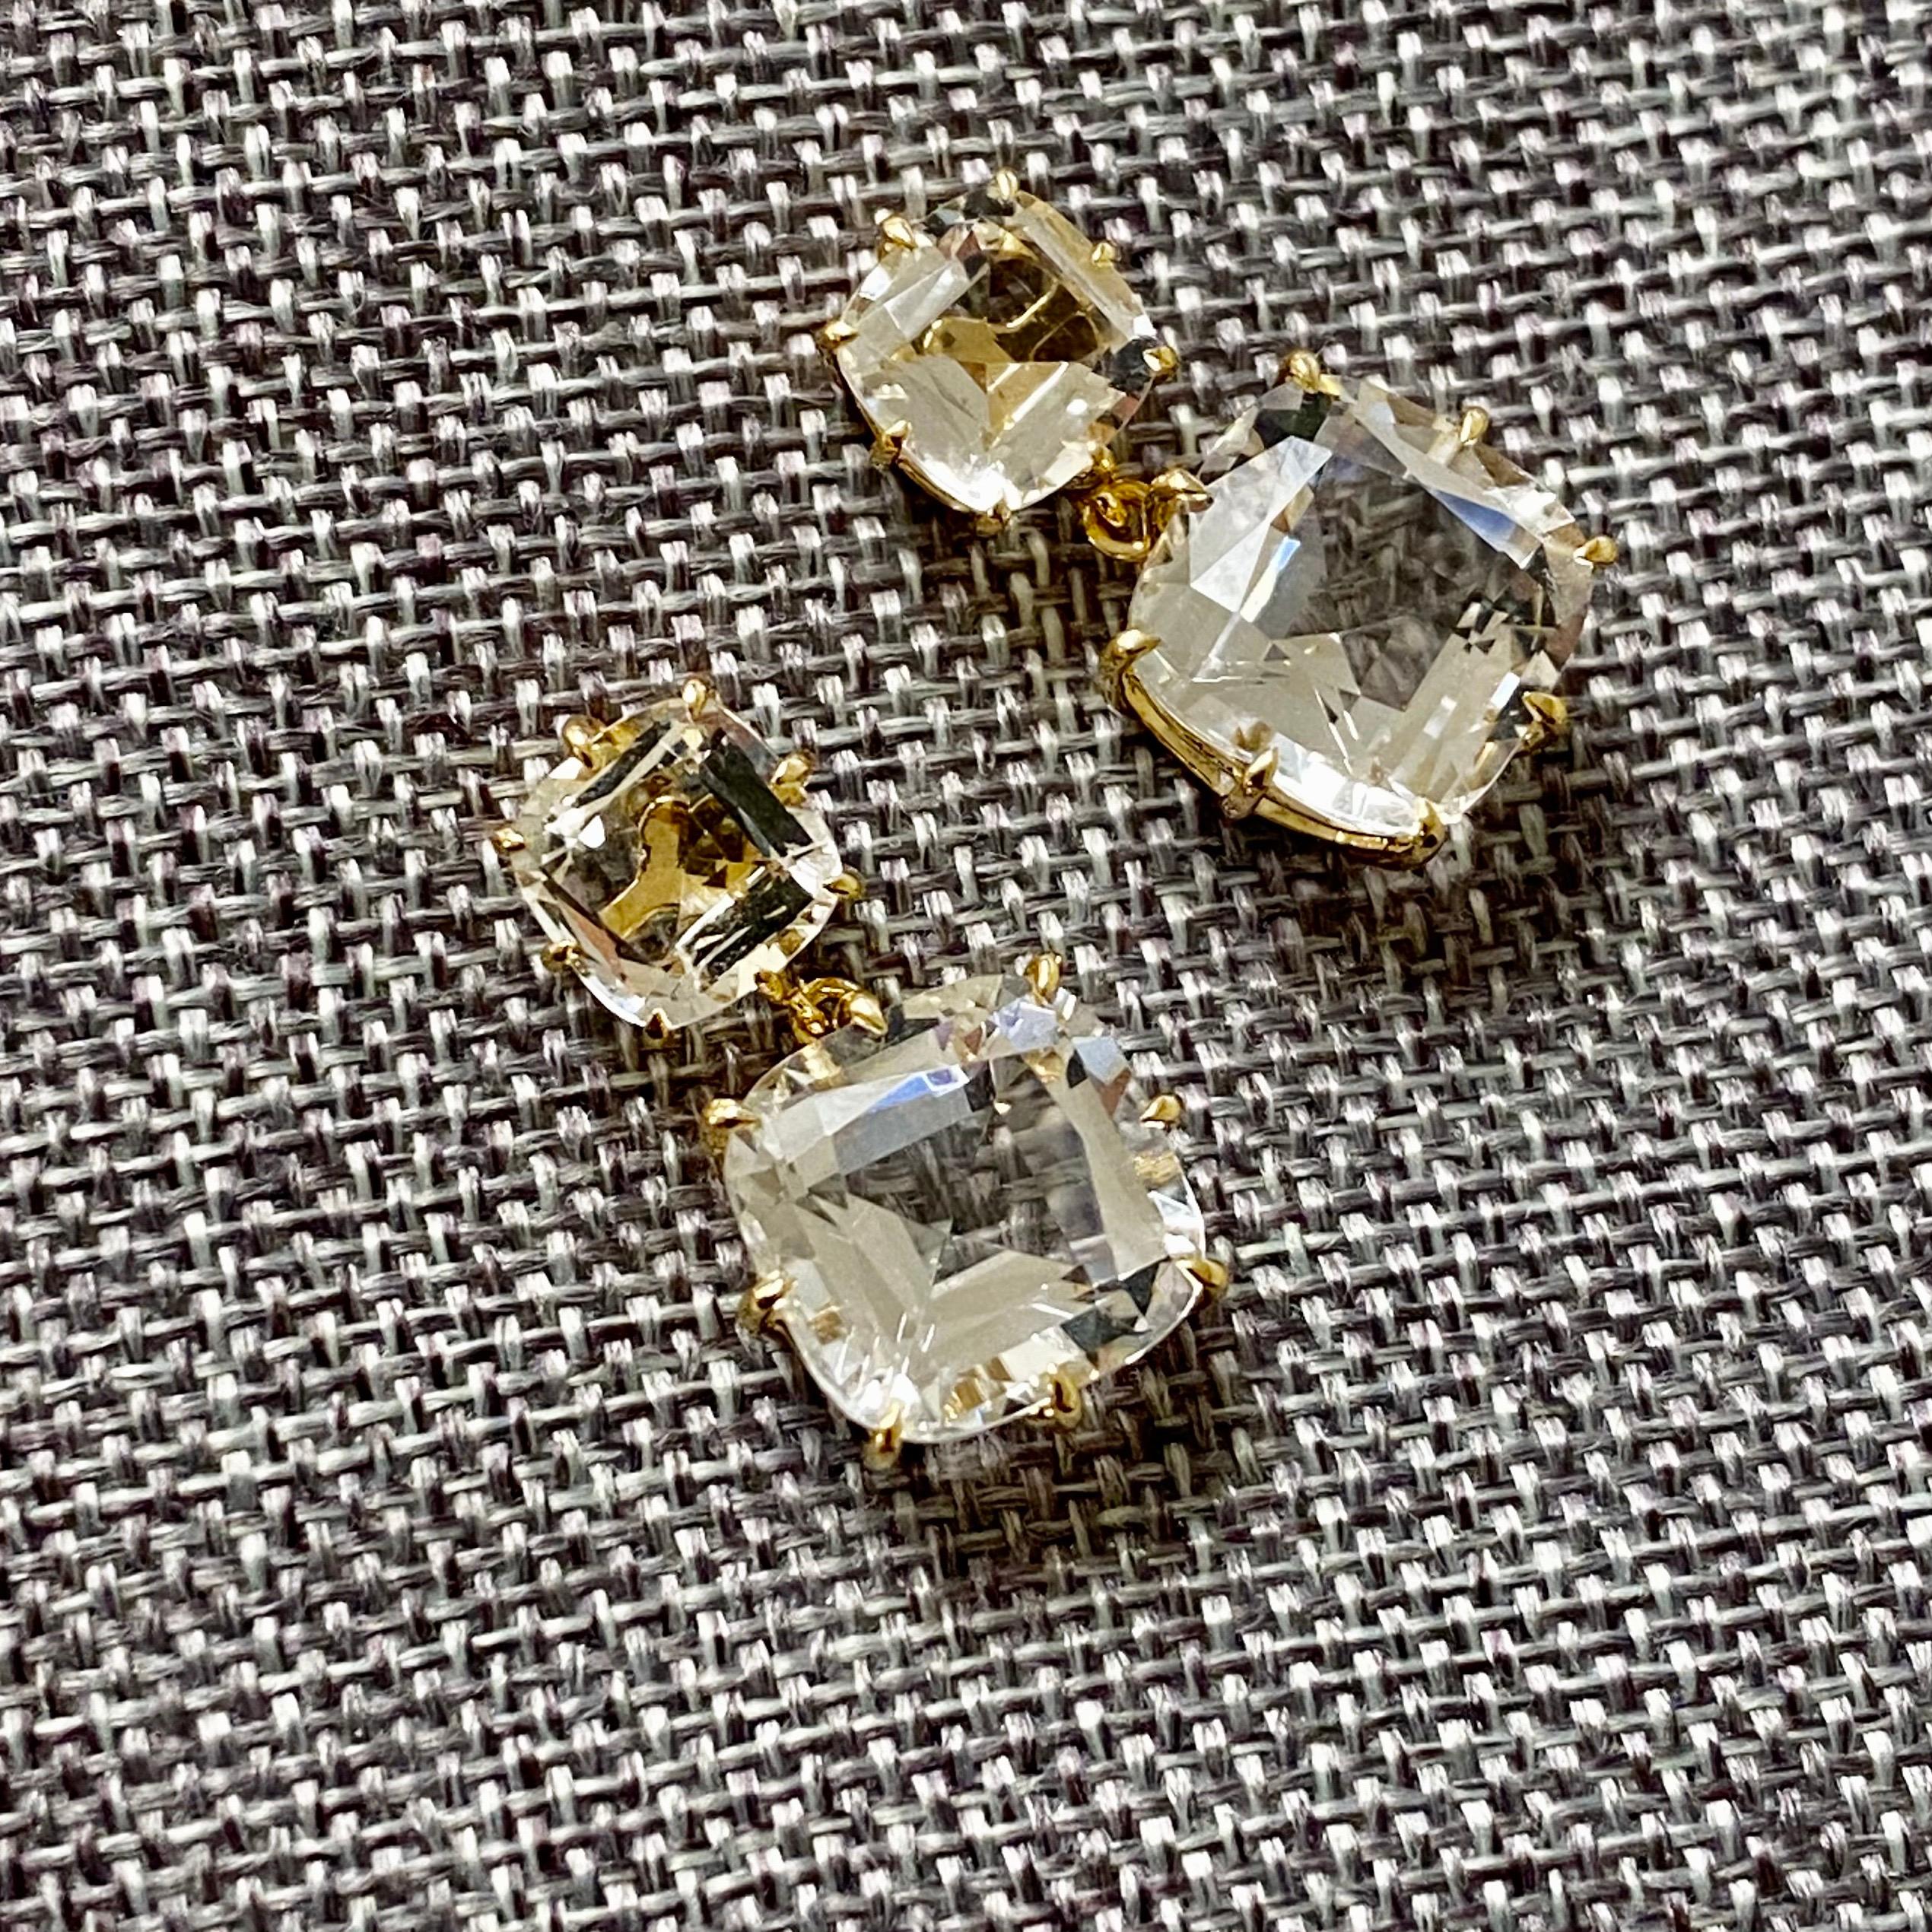 Created in 18 karat yellow gold
Rock crystal 11 carats approx.
Limited Edition

This limited edition pair of earrings, crafted from 18 karat yellow gold, is sure to add a touch of luxury to any ensemble. Its stunning Candy Blue Topaz and Moon Quartz